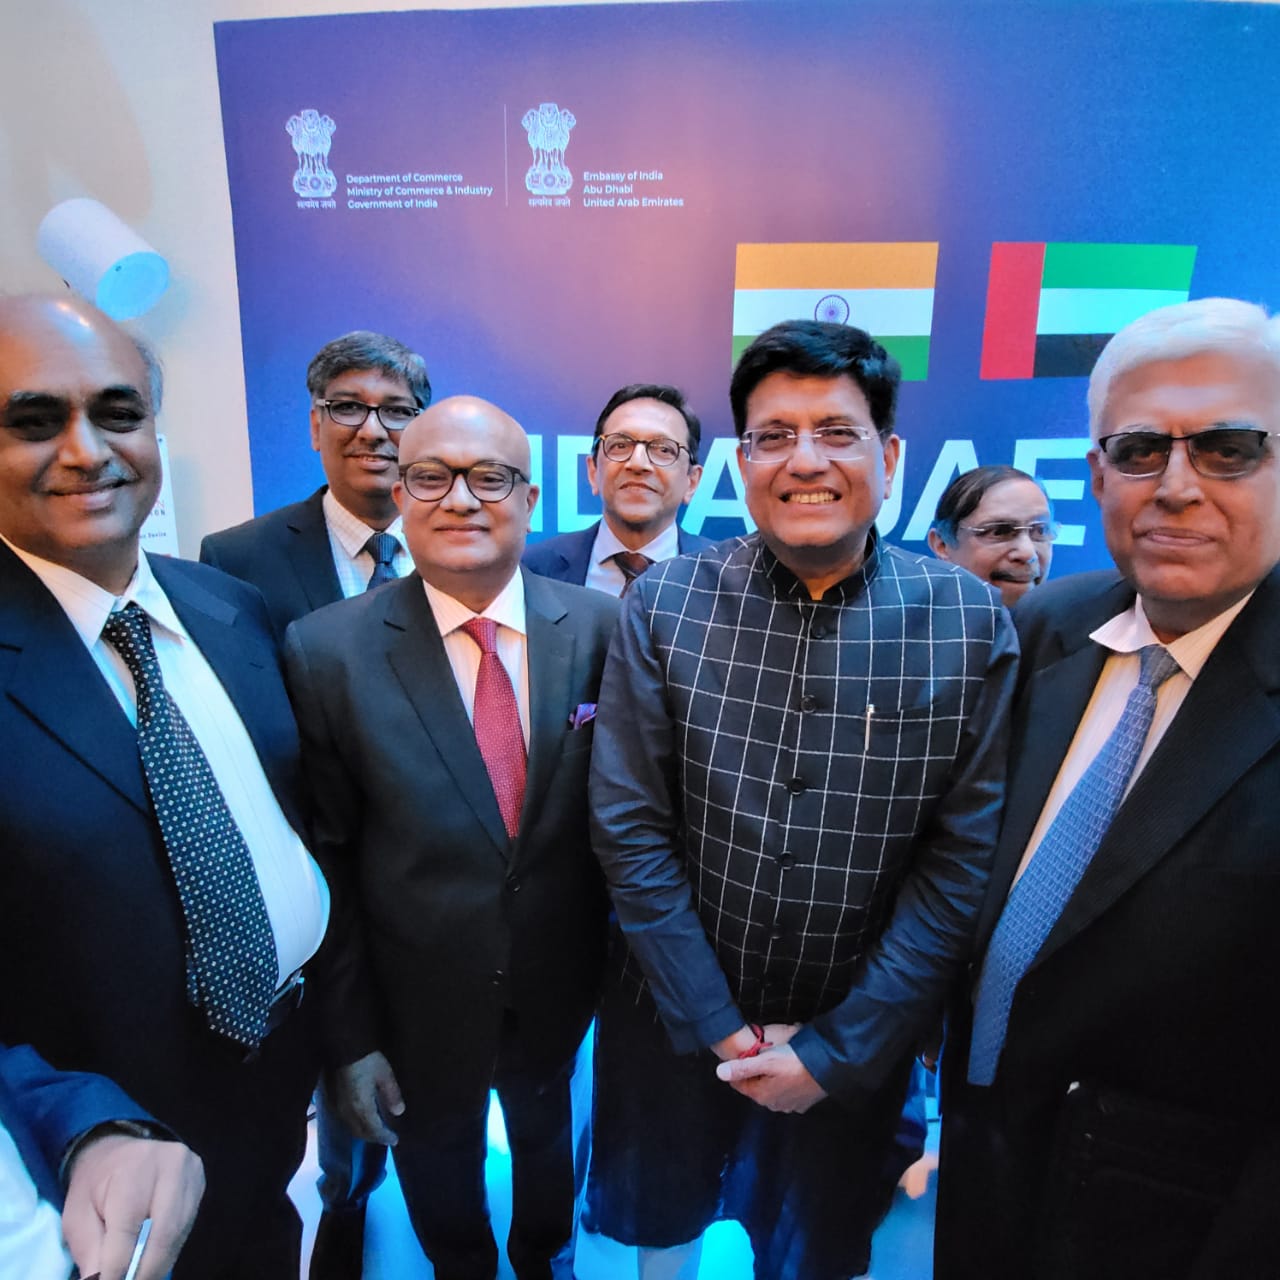 TEXPROCIL delegation with Shri Piyush Goyalji, Hon’ble Minister of Commerce & Industry, Consumer Affairs & Food & Public Distribution and Textiles at India-UAE CEPA Meet at Dubai on 28th March 2022.